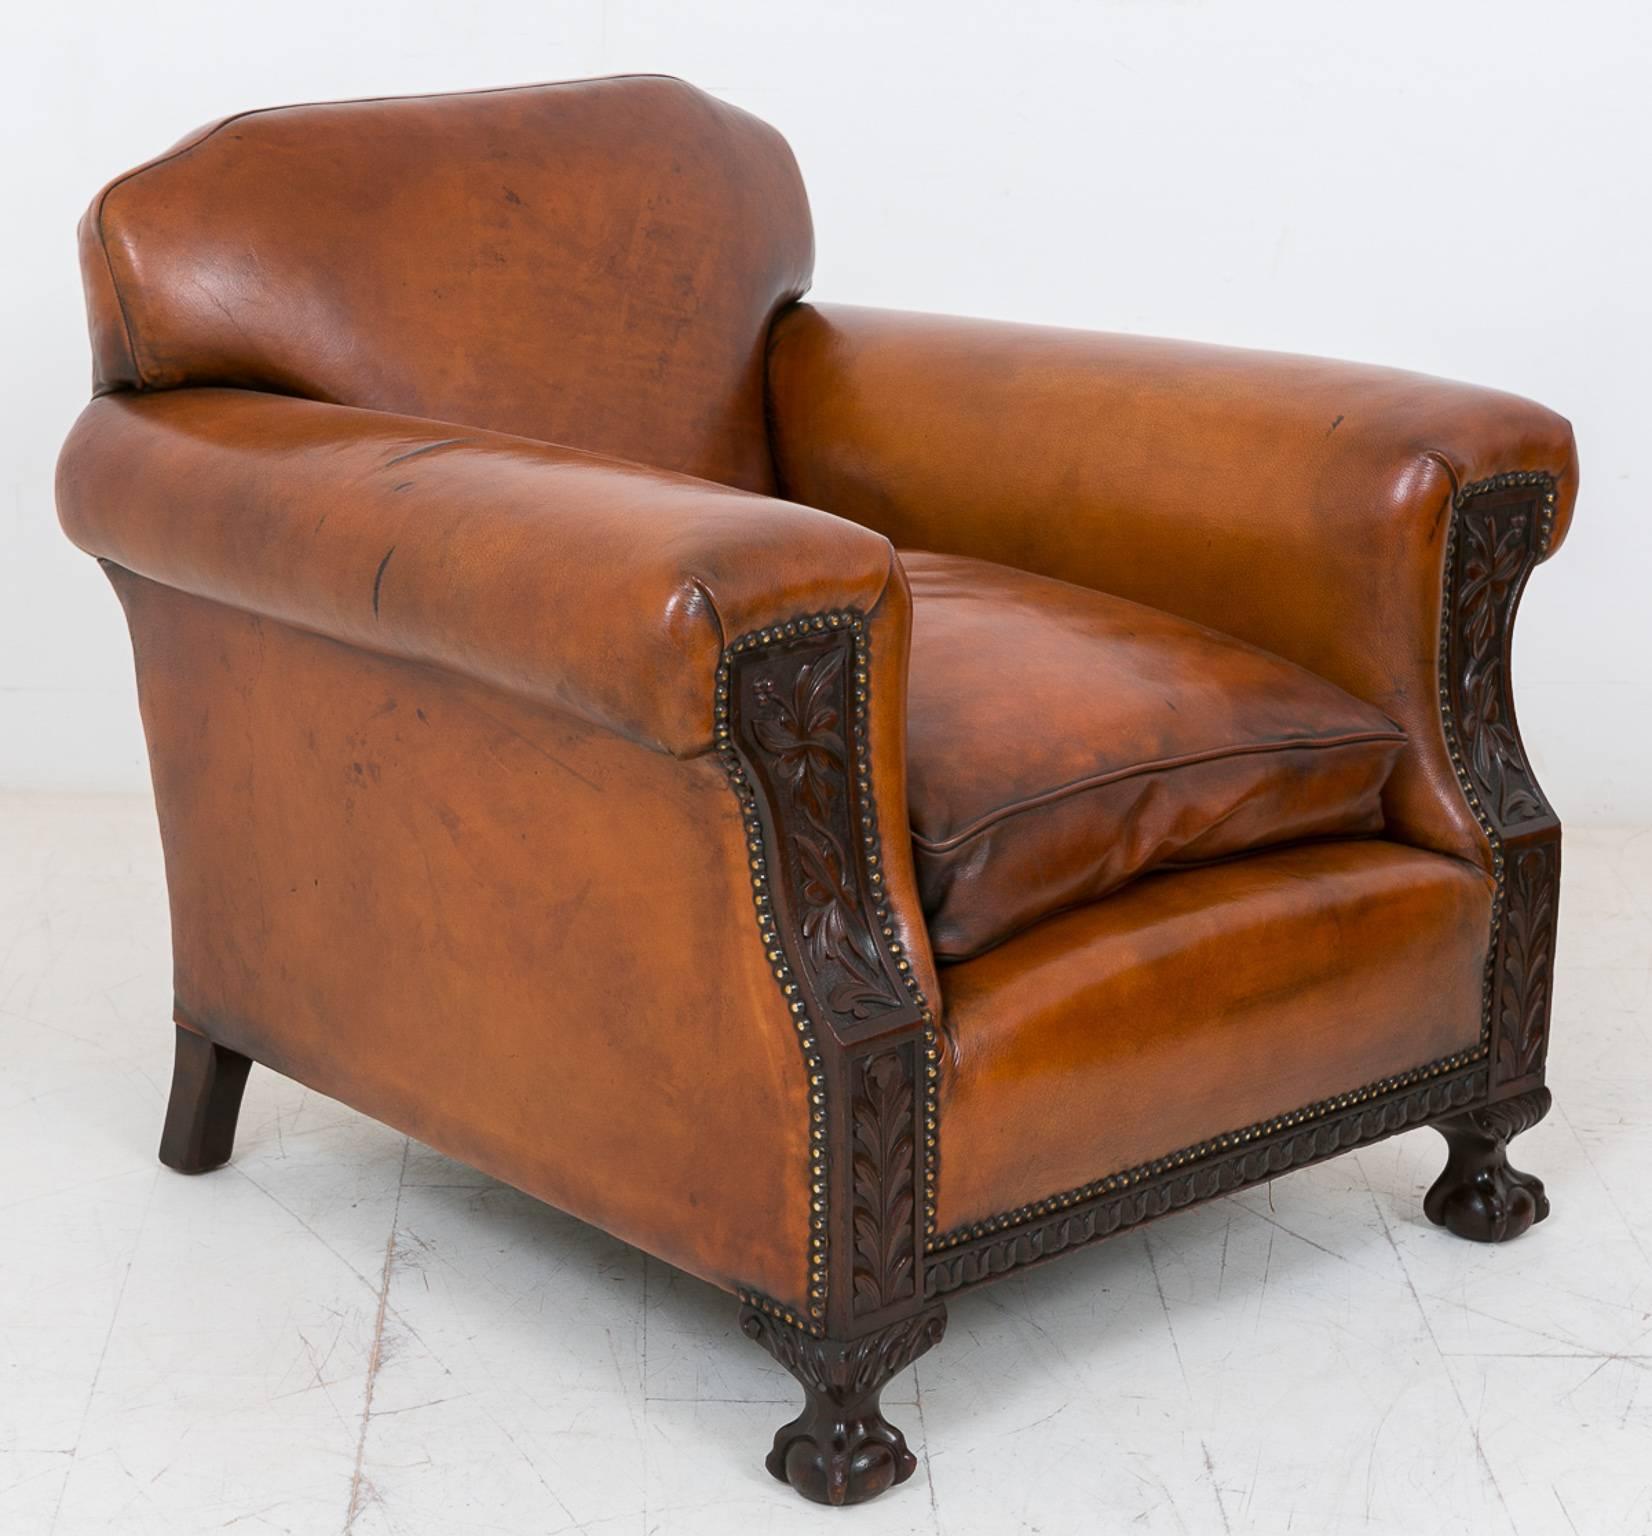 Pair of leather club chairs, standing on ball and claw feet with carved mouldings and carved leaf decoration.
Features hand nailed leather work.
These chairs are of a very good color and extremely comfortable.

Size:
Height 31 1/2 (80cm)
Width